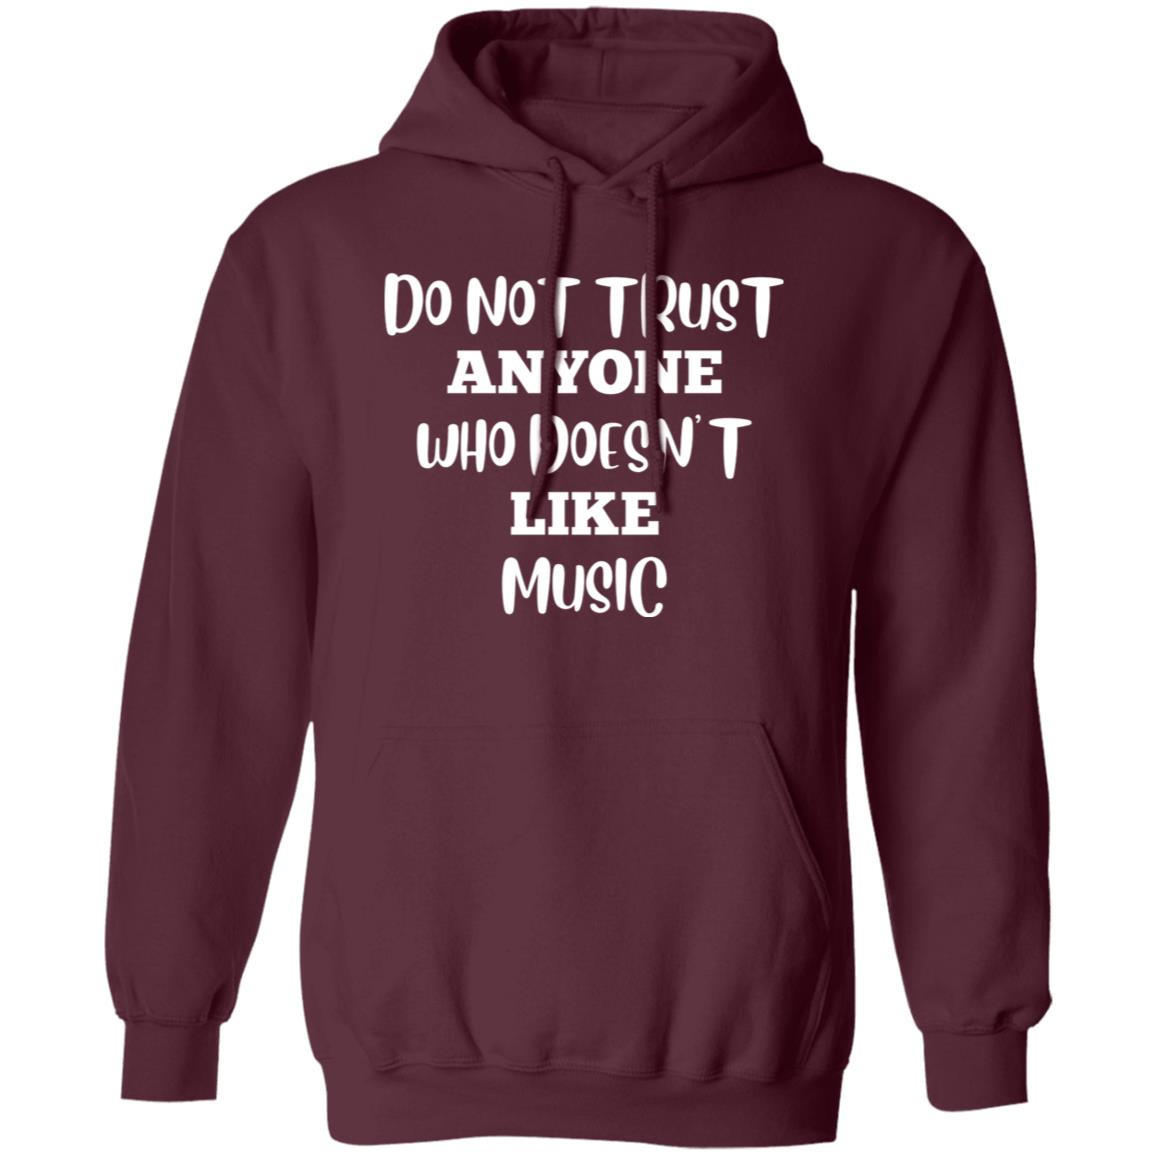 Do Not Trust Anyone Who Doesn't Like Music Hoodie